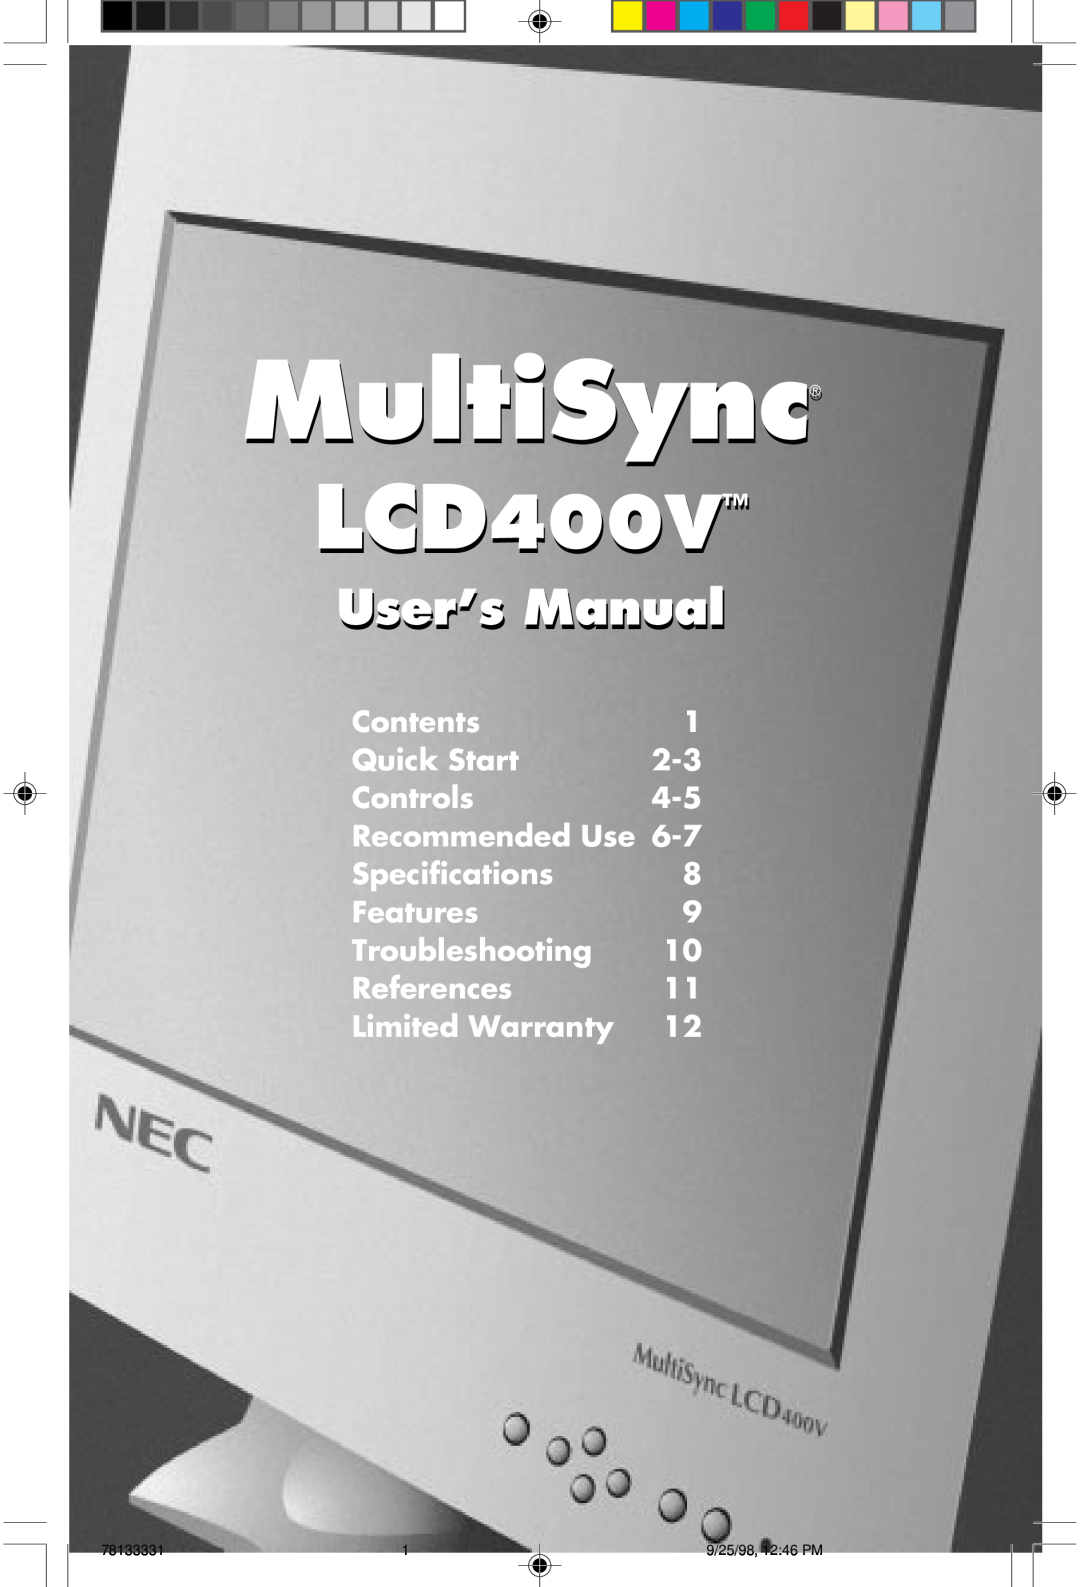 NEC LA-1422JMW user manual Contents, Quick Start, Controls, Recommended Use Specifications Features9, MultiSync, LCD400V 